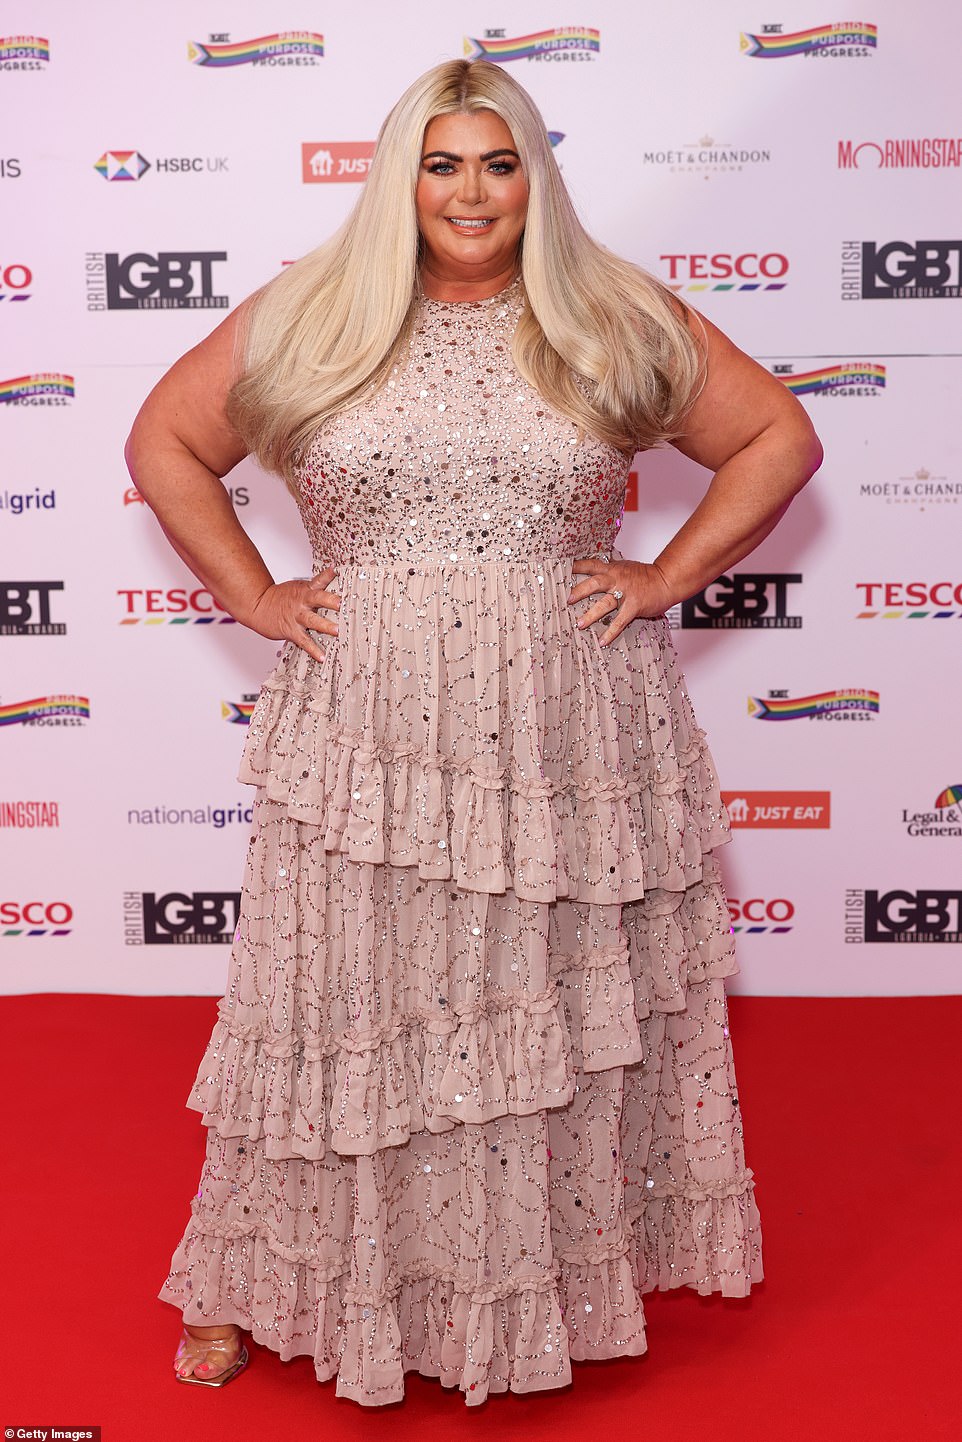 Gemma Collins glowed in a beaded dress with a tiered skirt